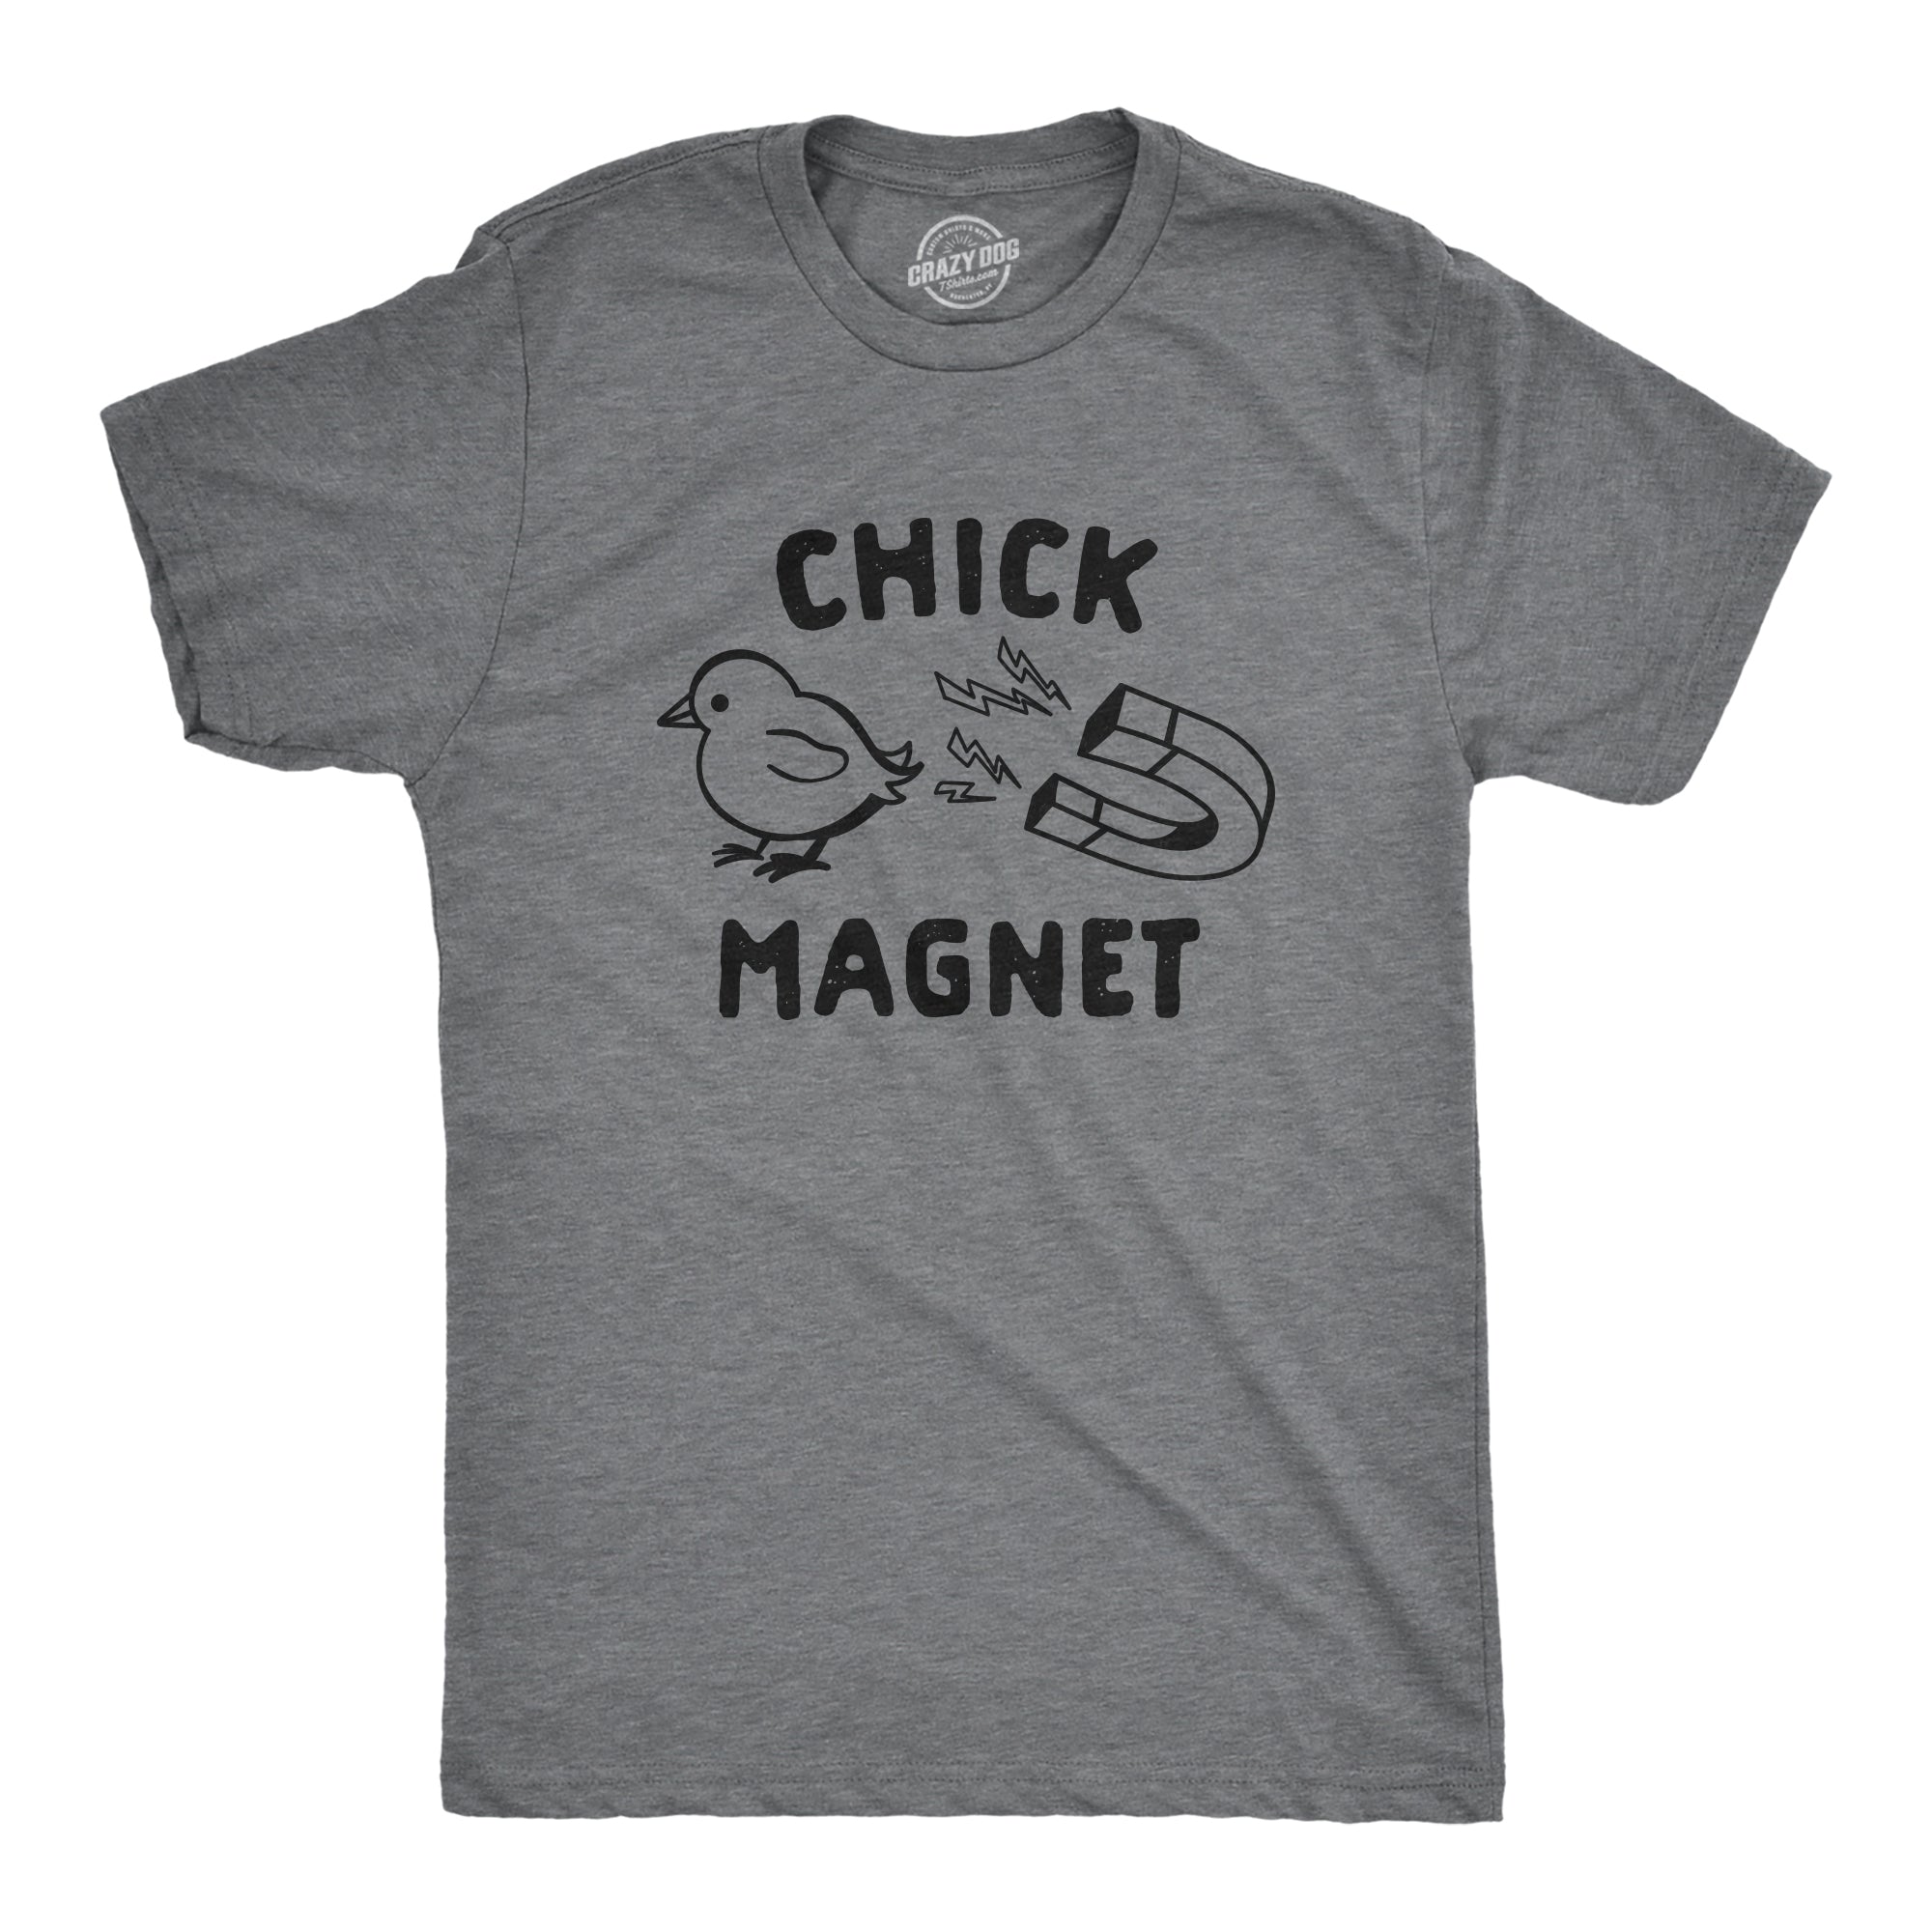 Funny Dark Heather Grey Chick Magnet Mens T Shirt Nerdy Easter Tee